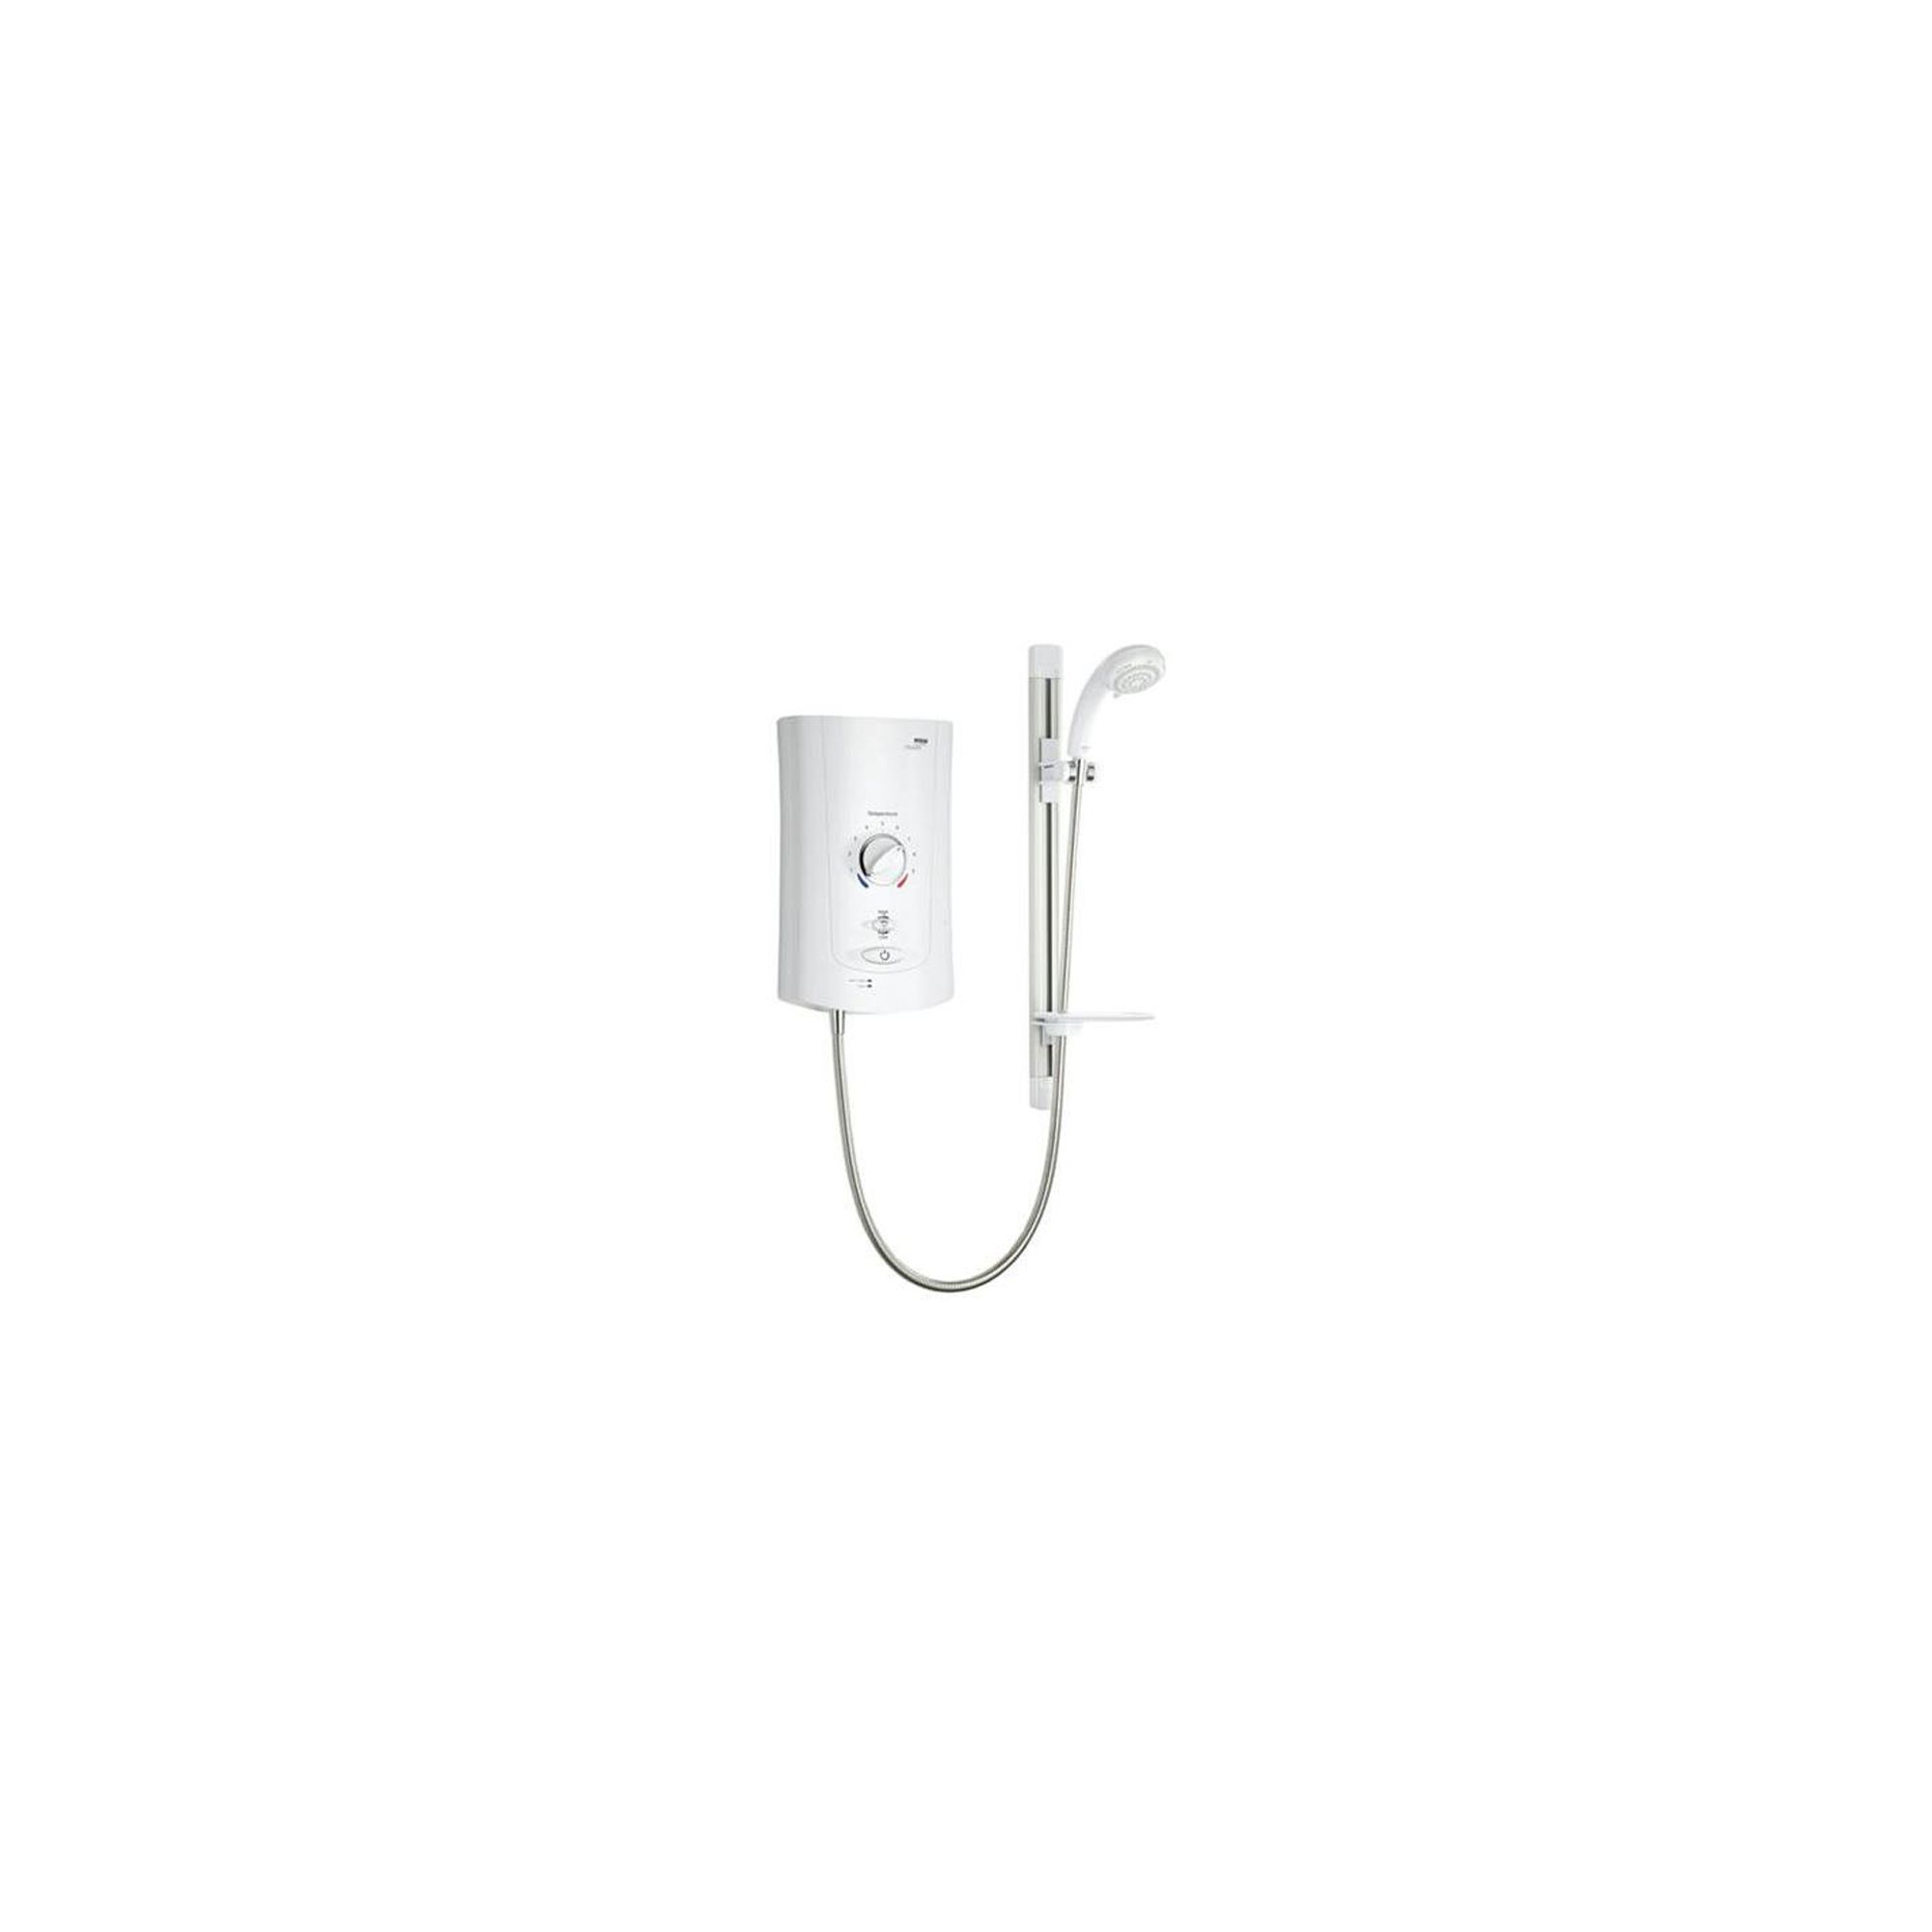 Mira Advance 9.0 kW Electric Shower for Low Pressure Systems, White/Chrome at Tesco Direct